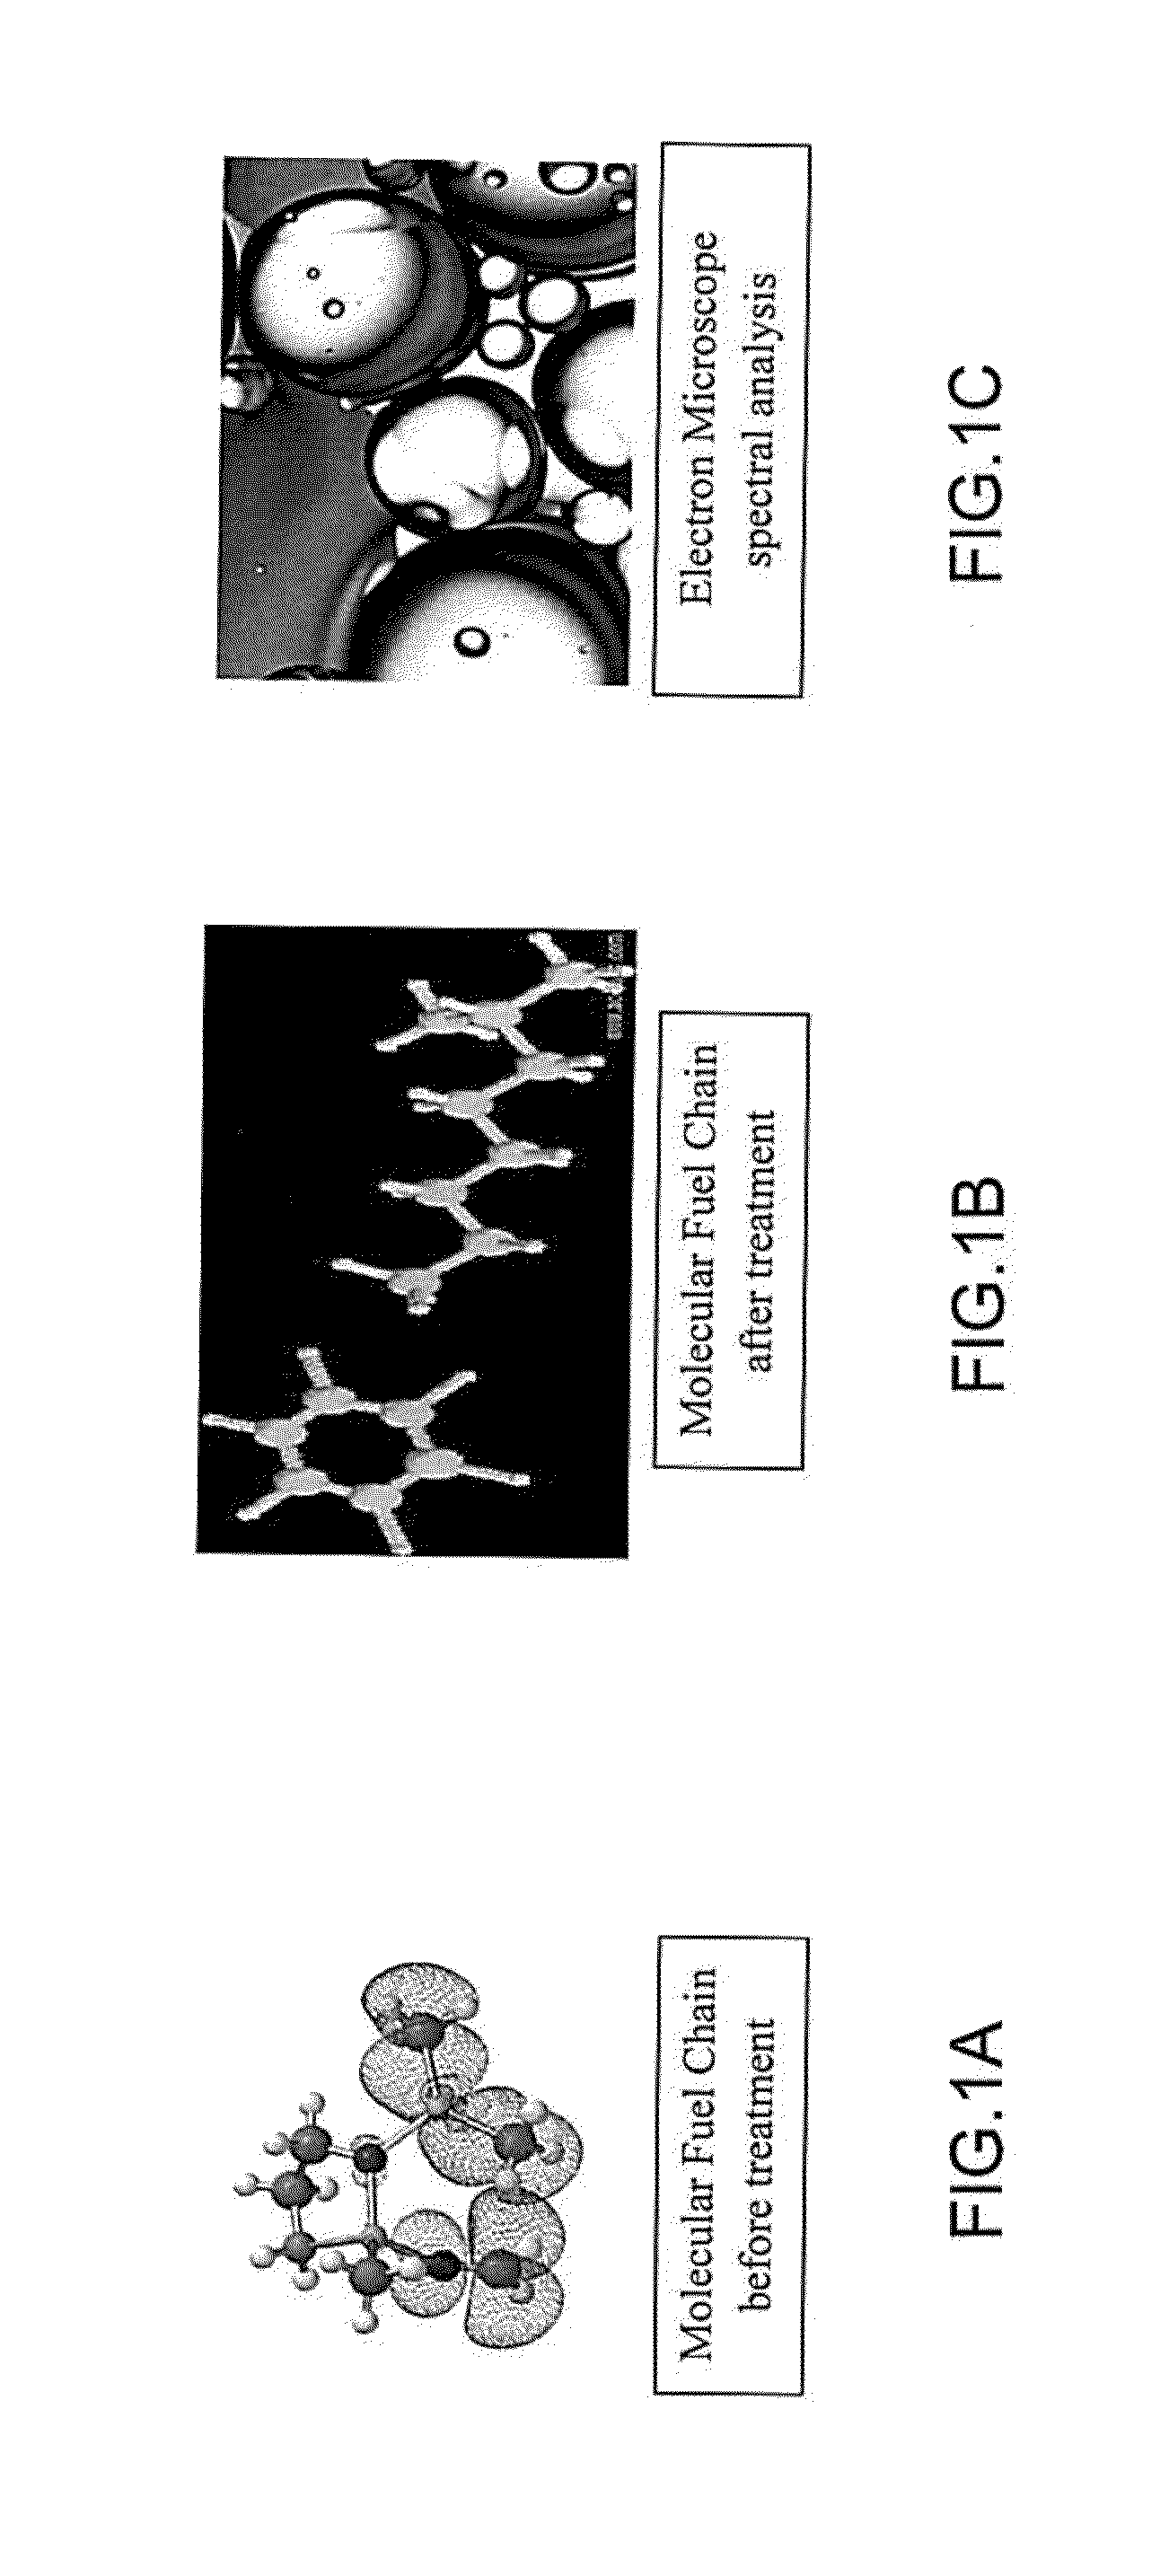 System and Method for Creating and Maintaining Liquid Bunker and Reducing Sulfur Contaminants